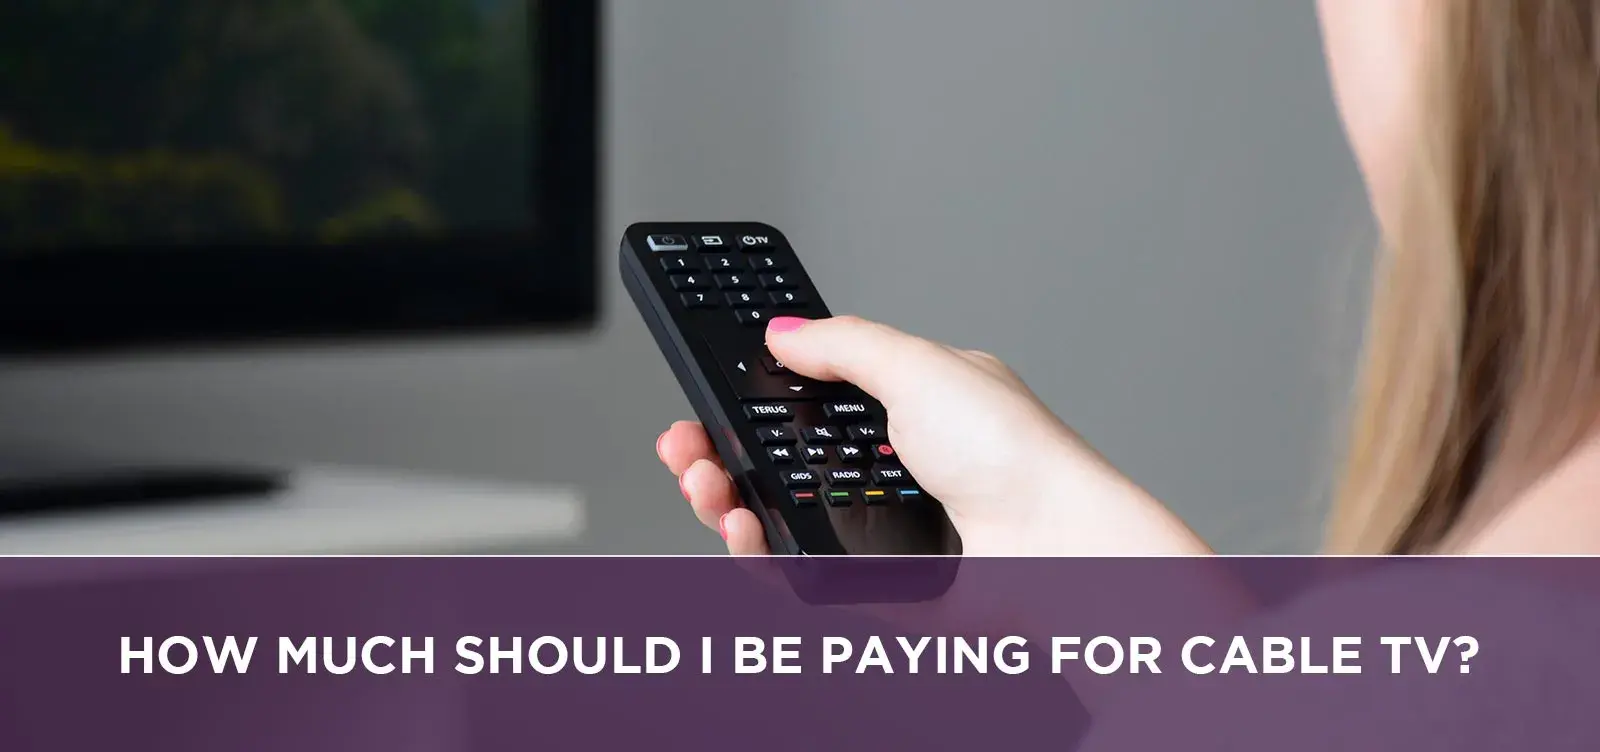 How Much Should I Be Paying for Cable TV